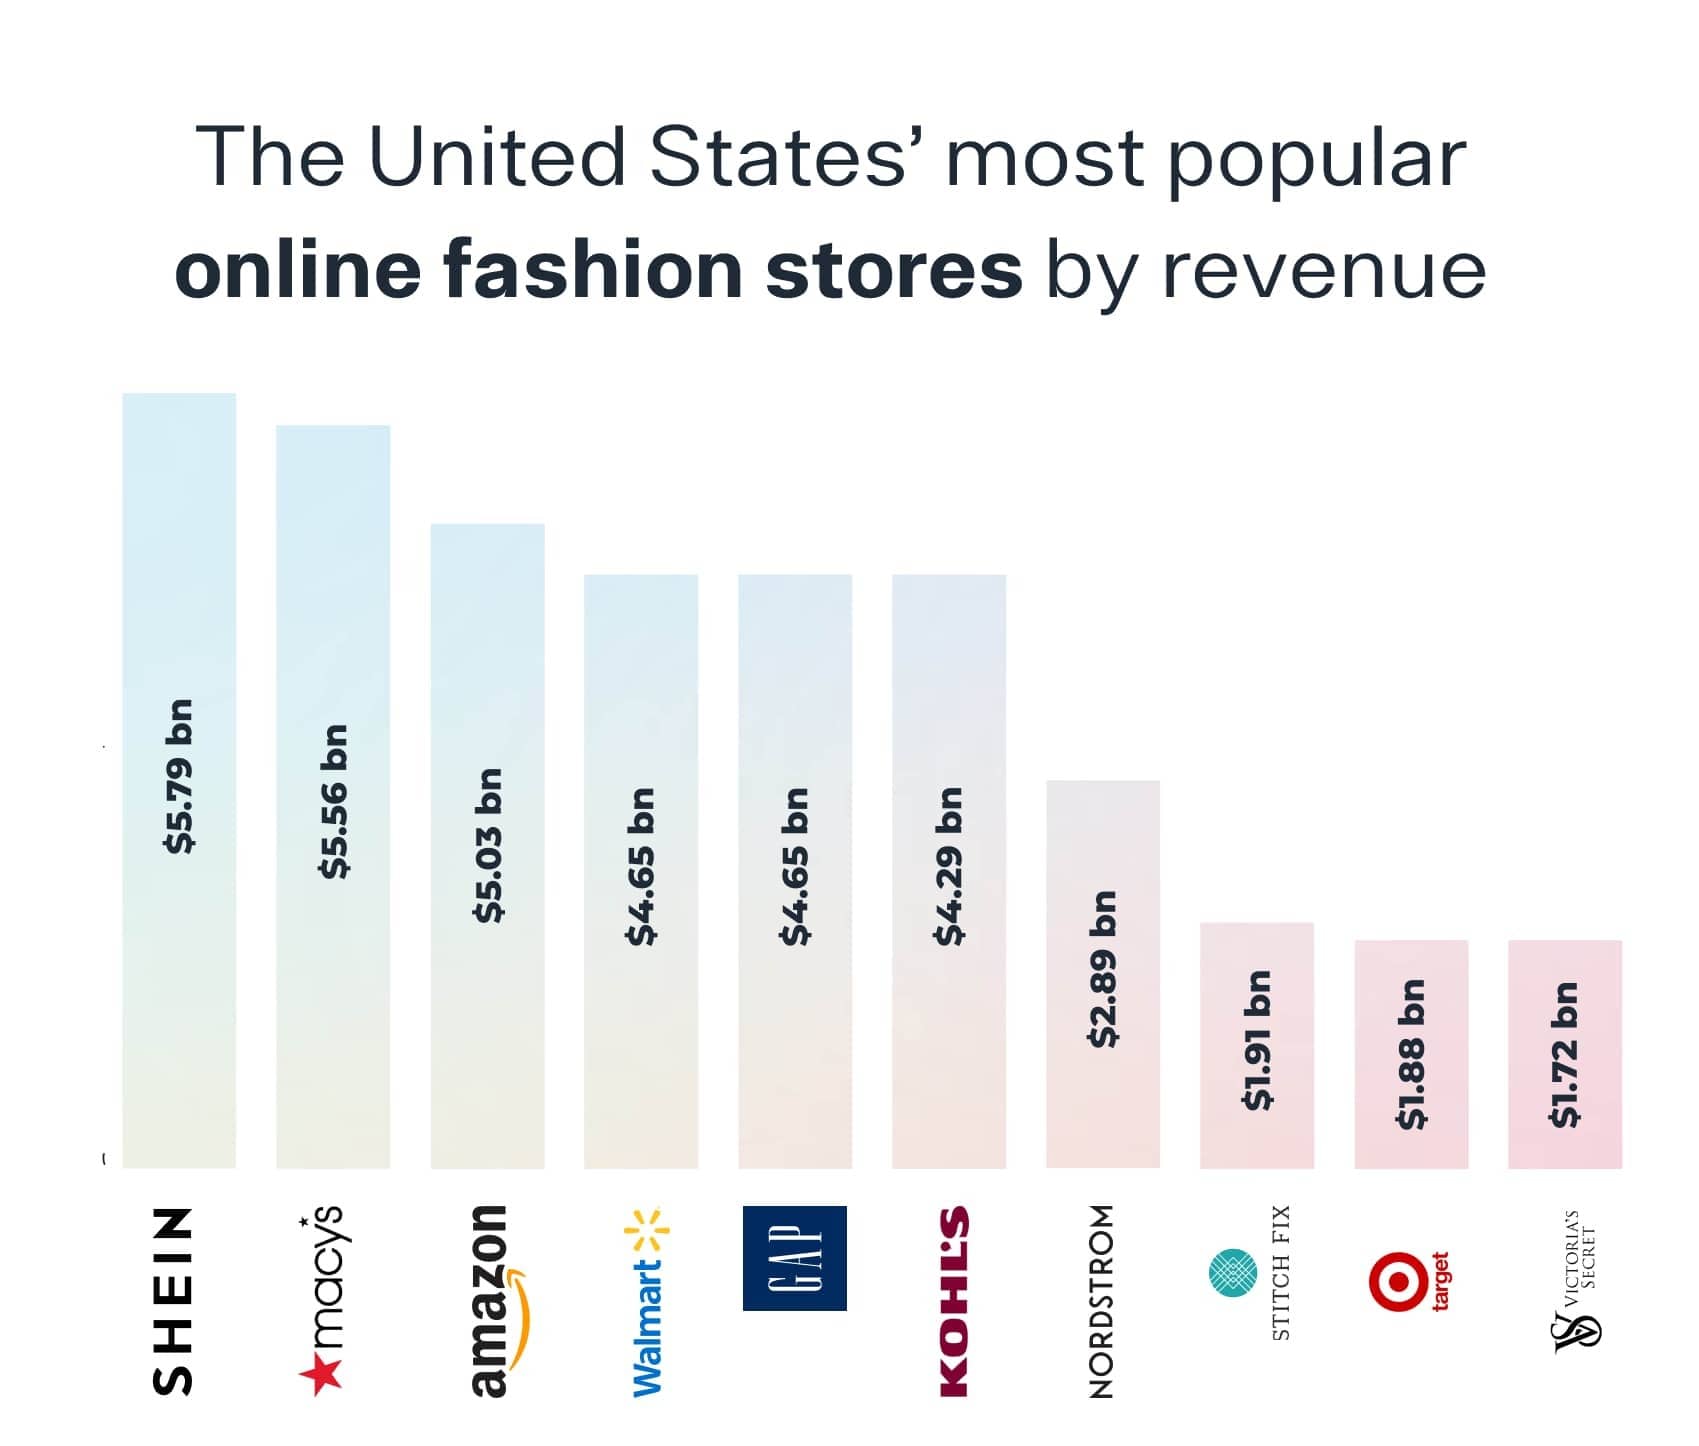 The United States' most popular online fashion stores by revenue